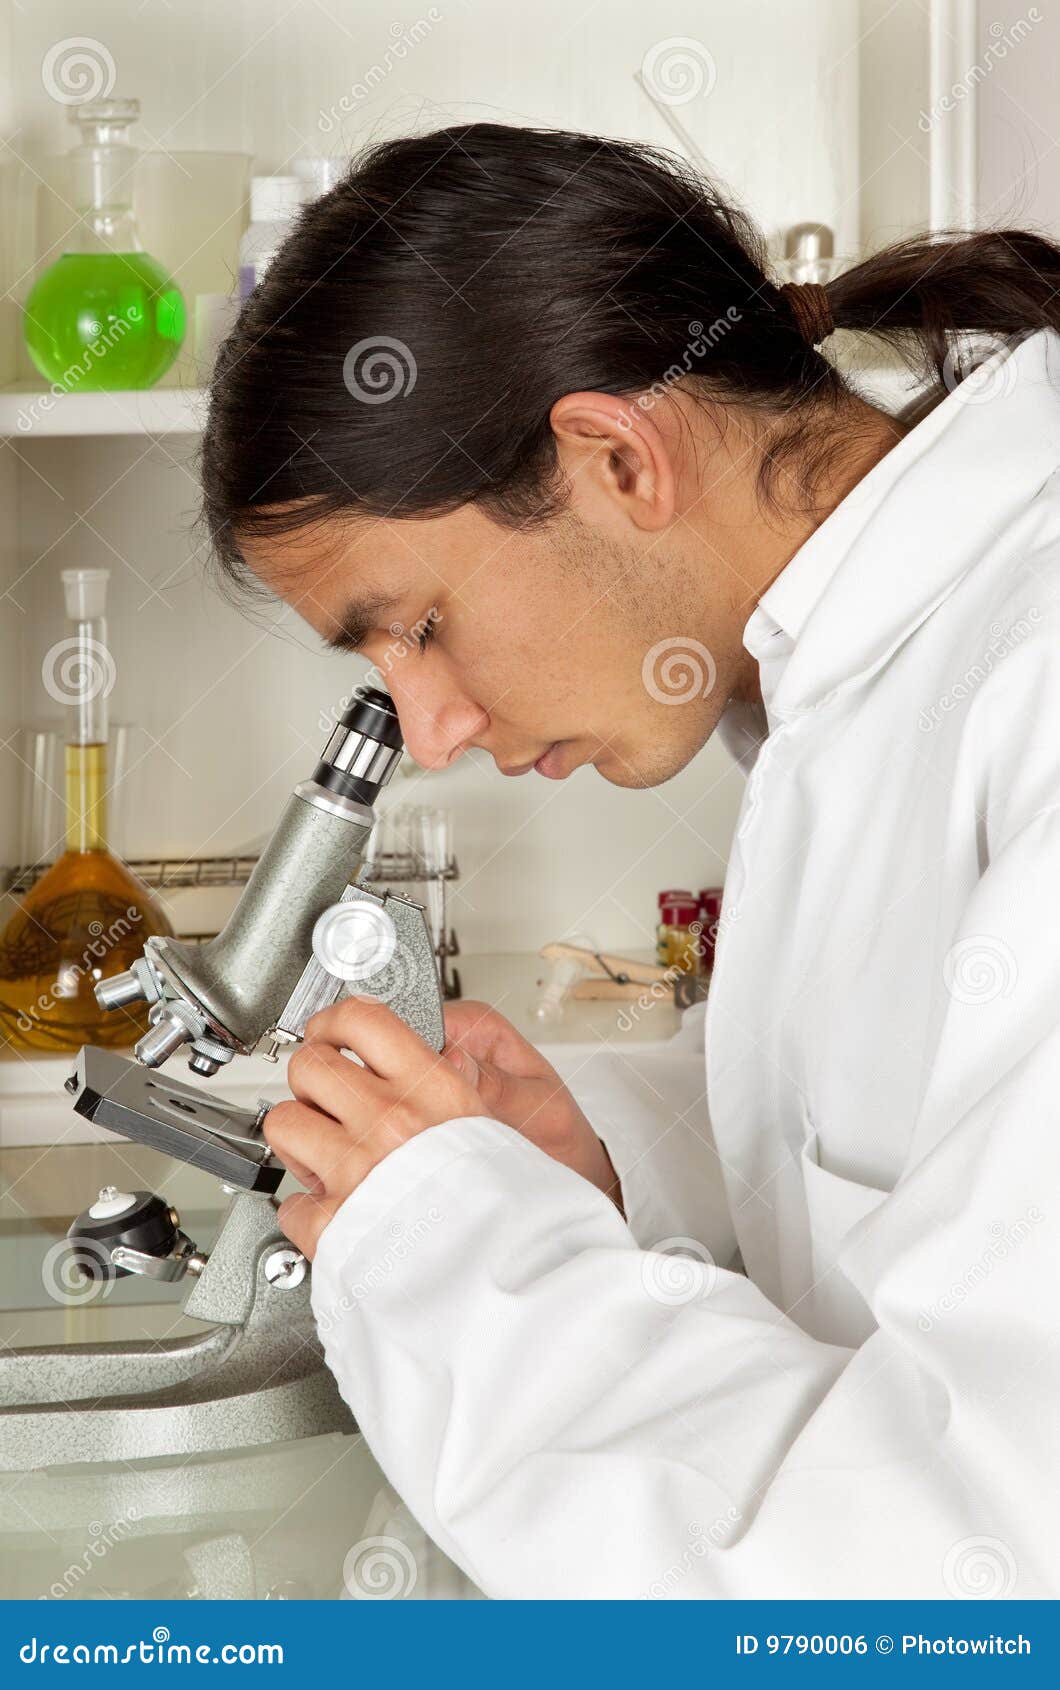 Jobs that require using a microscope